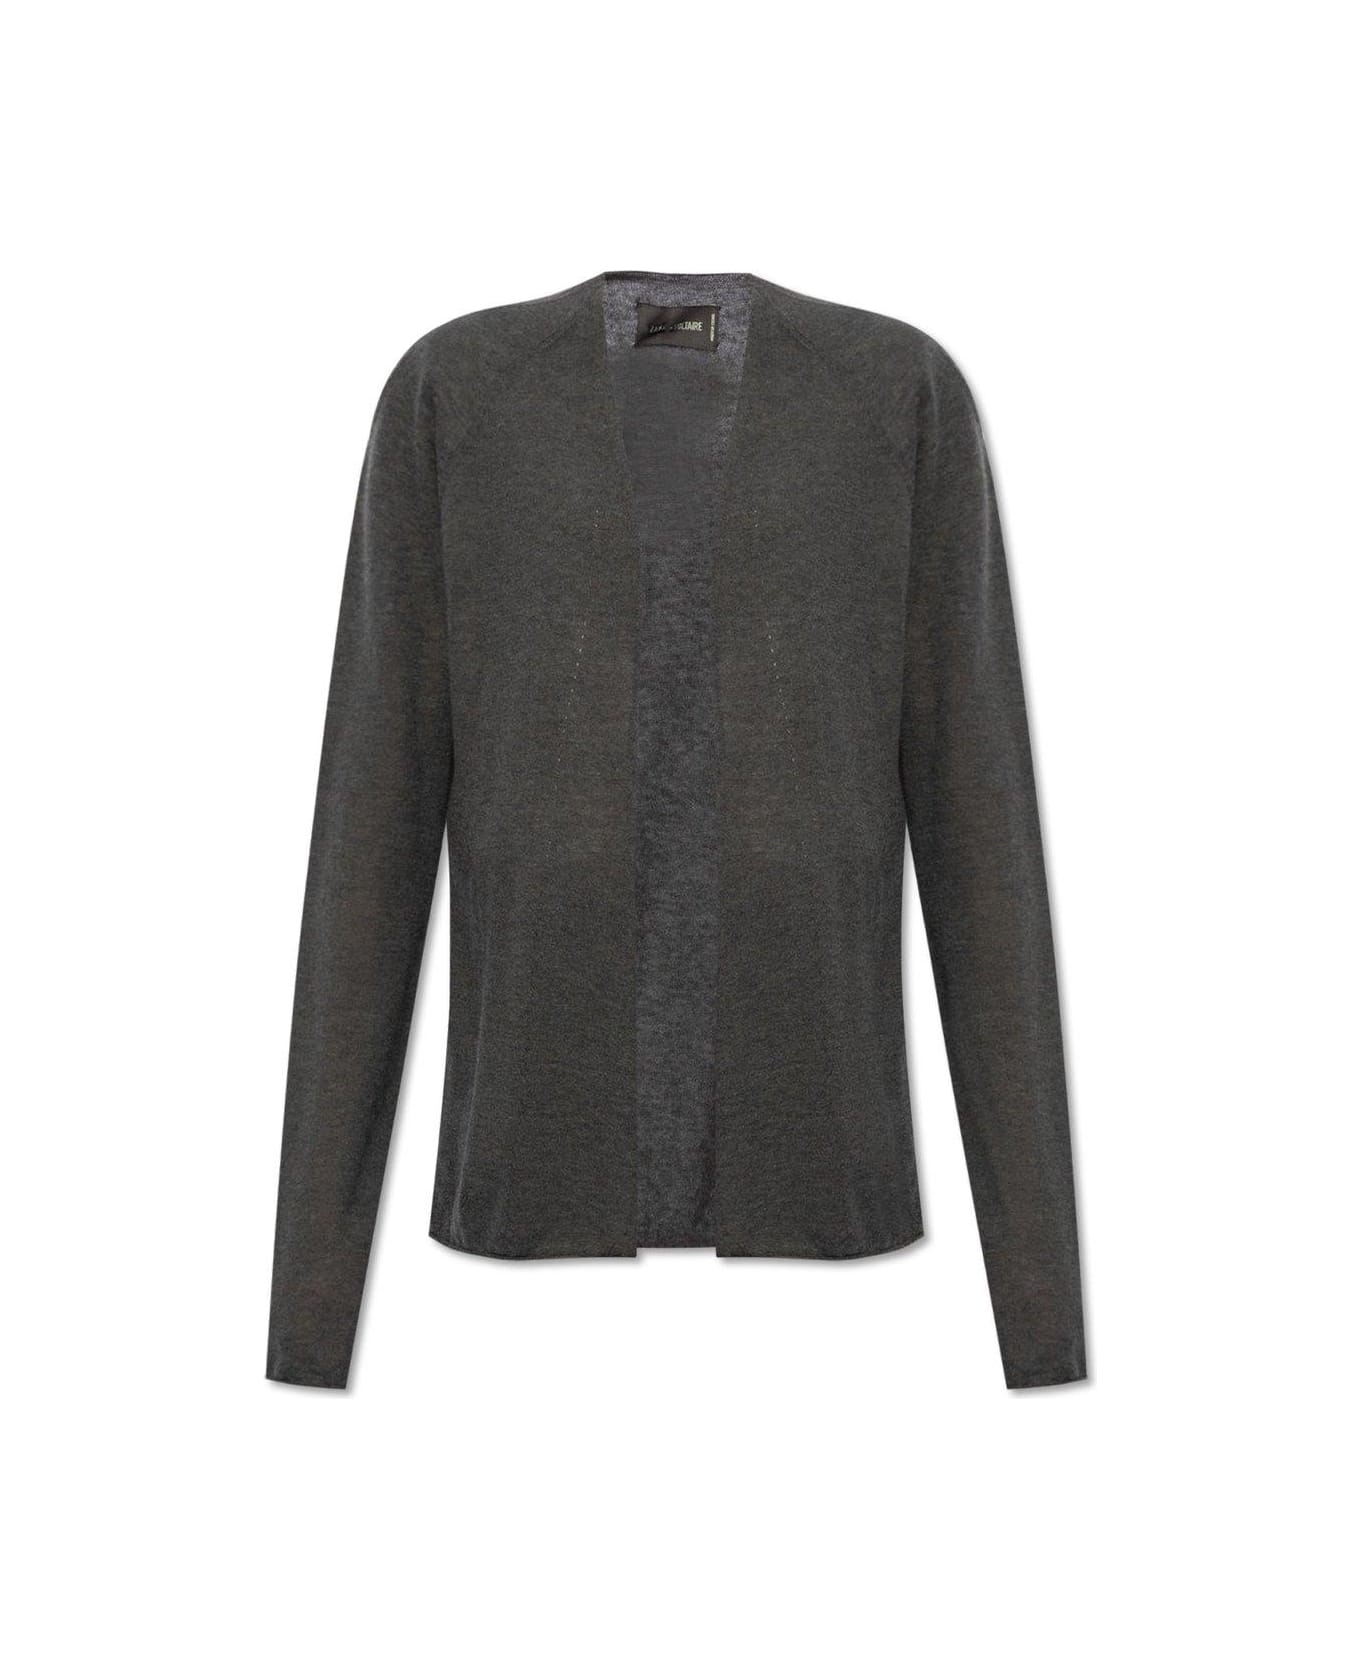 Zadig & Voltaire Open Front Knitted Cardigan - GREY/GREEN